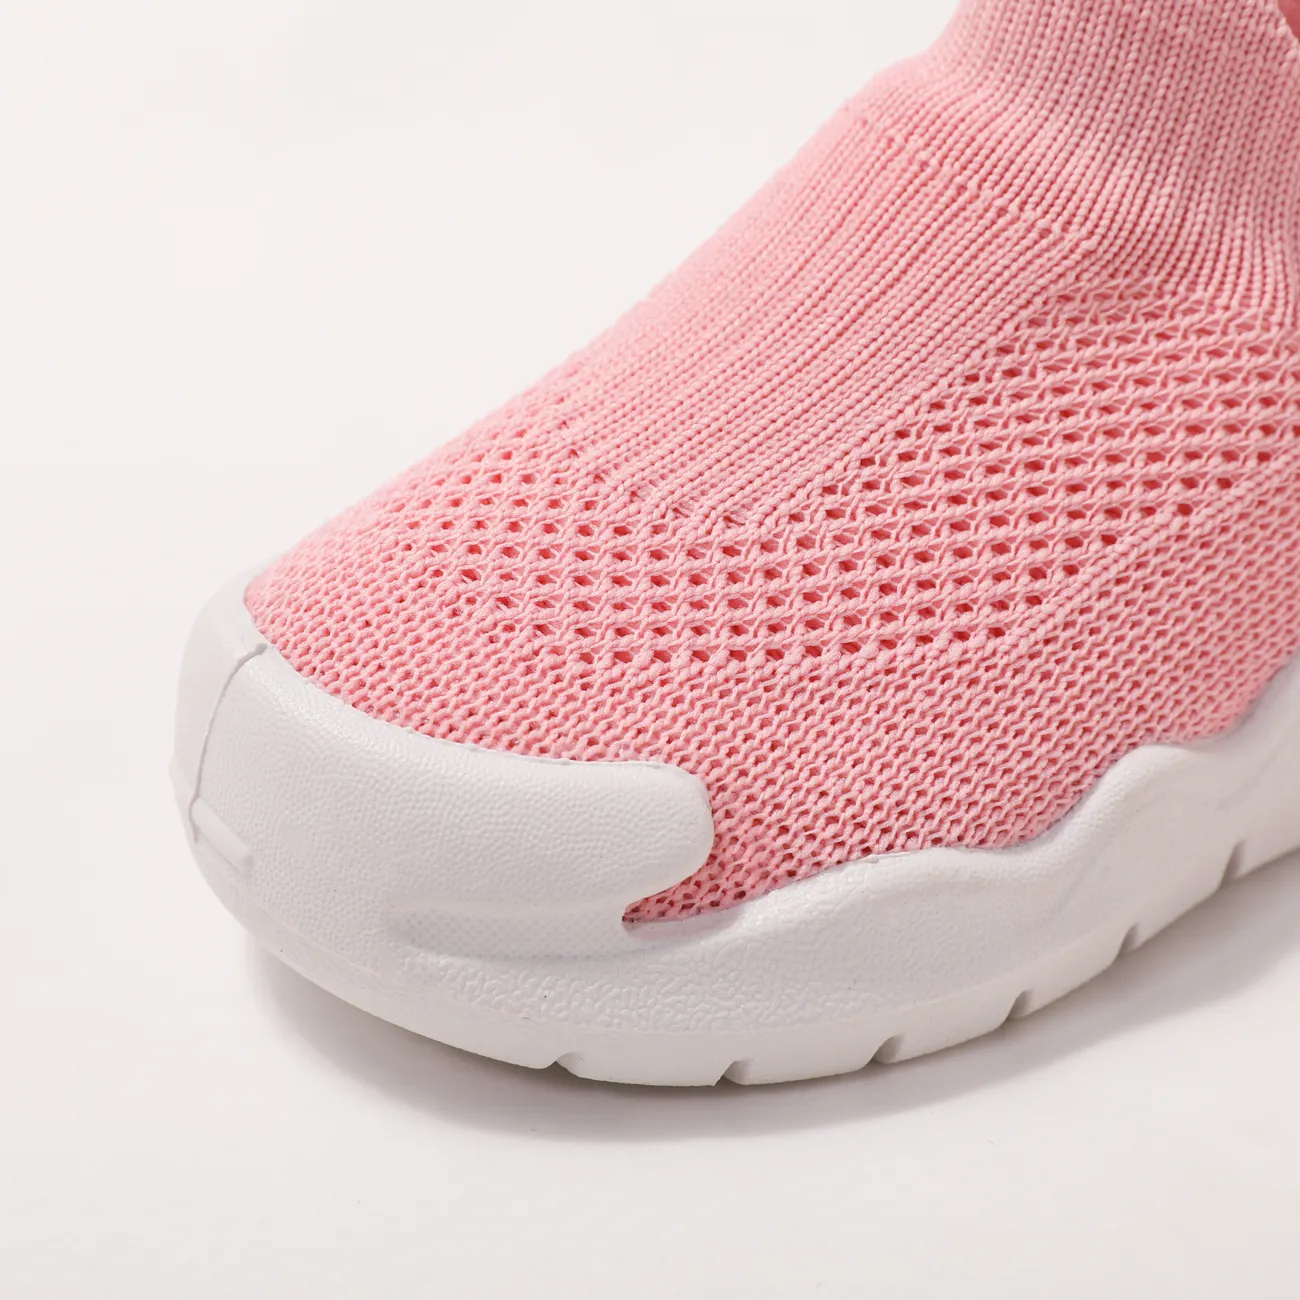 Toddler/Kid Sporty Style Mesh and Cotton Slip-on Sports Shoes  Pink big image 1